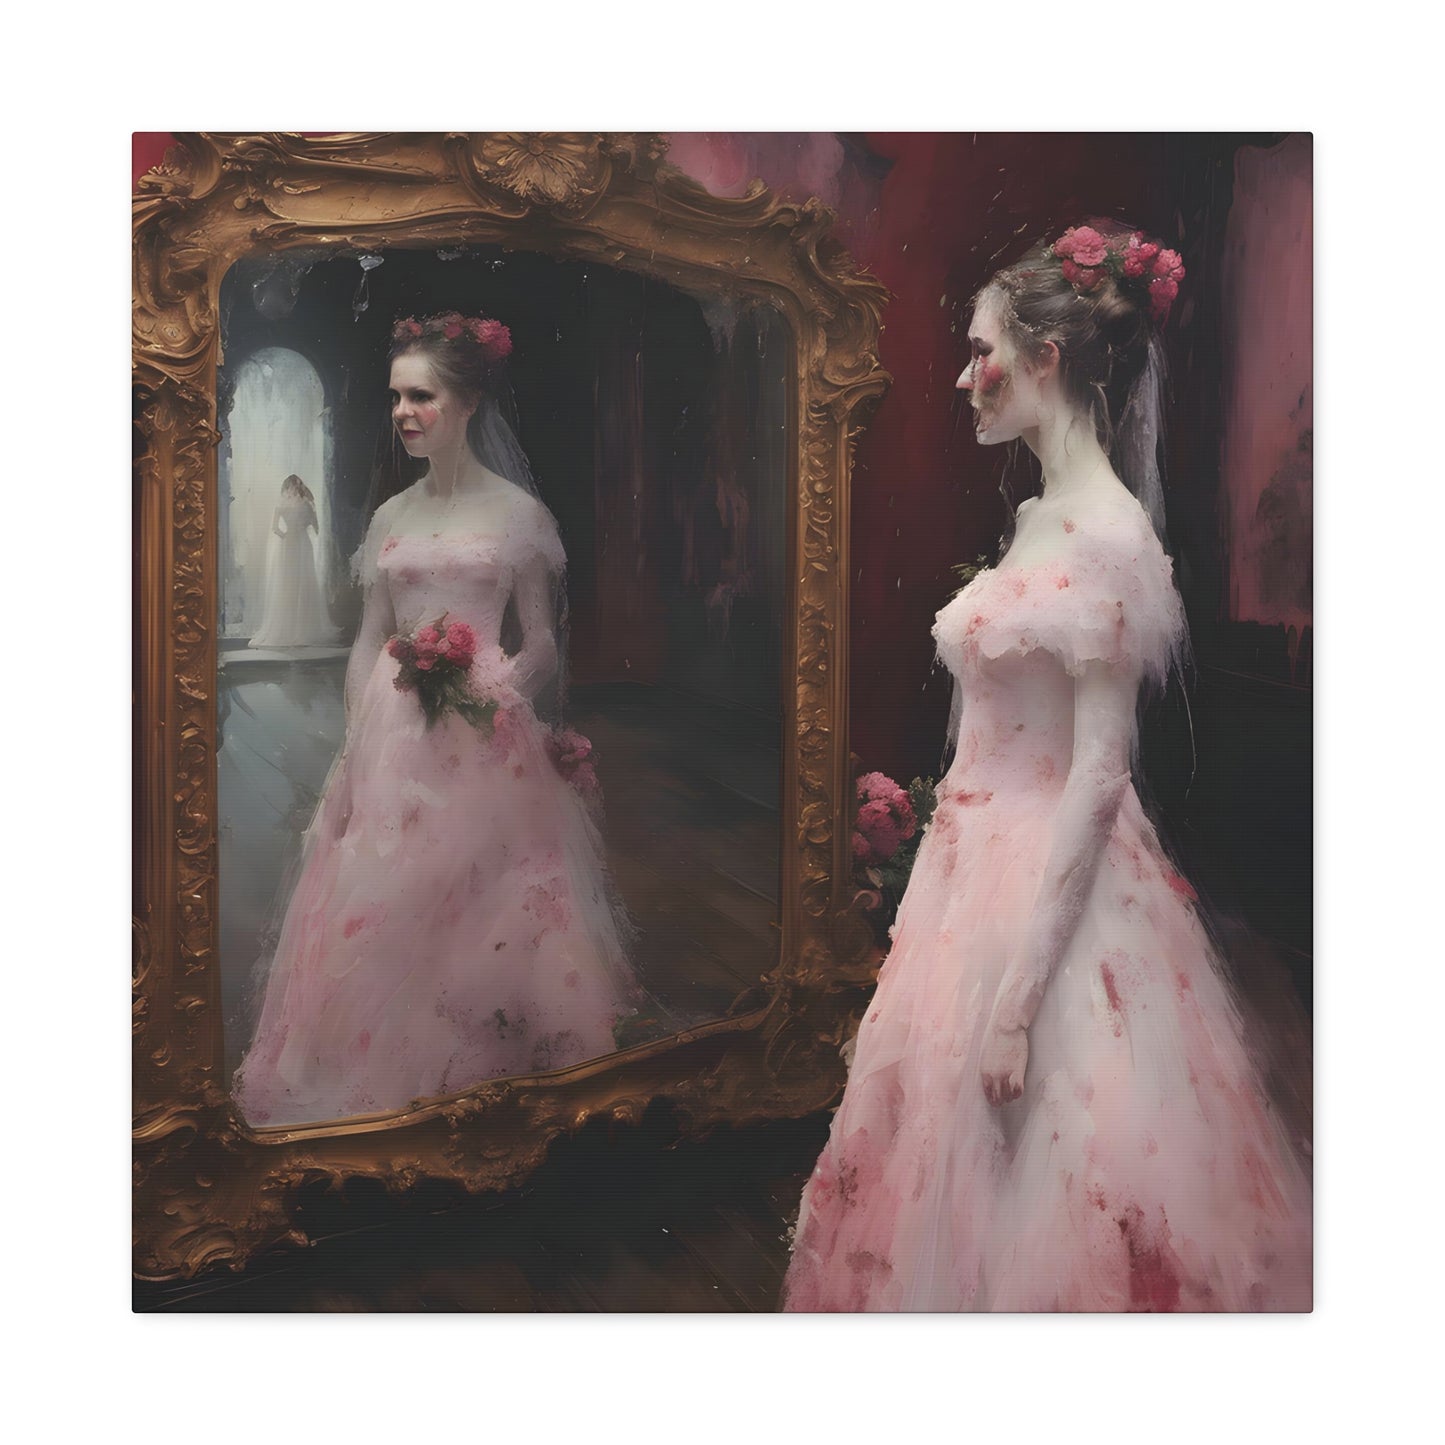 image 4 Reflections of a Timeless Moment' painting captures a bride in a vintage pink gown, reflecting in a grandiose mirror in a Victorian dressing room. The artwork contrasts the opulent gold frame with the room's dark tones, highlighting her delicate dress and tender expression, symbolizing personal reflection and quiet joy before a life-changing event